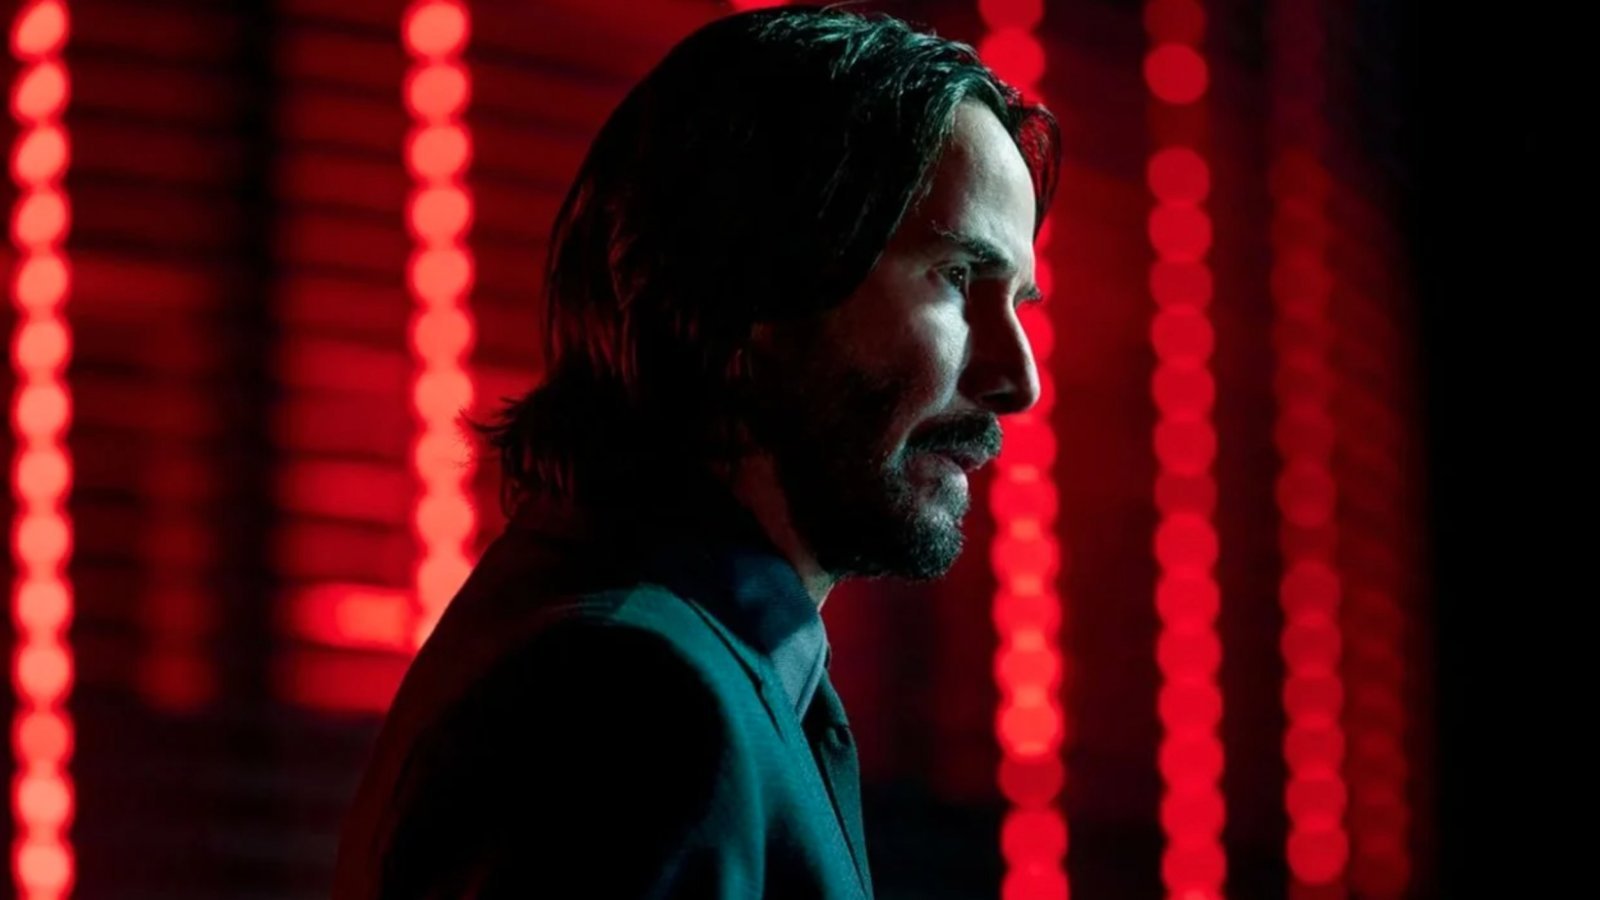 John Wick 4: The rating on Rotten Tomatoes is the highest in the entire franchise